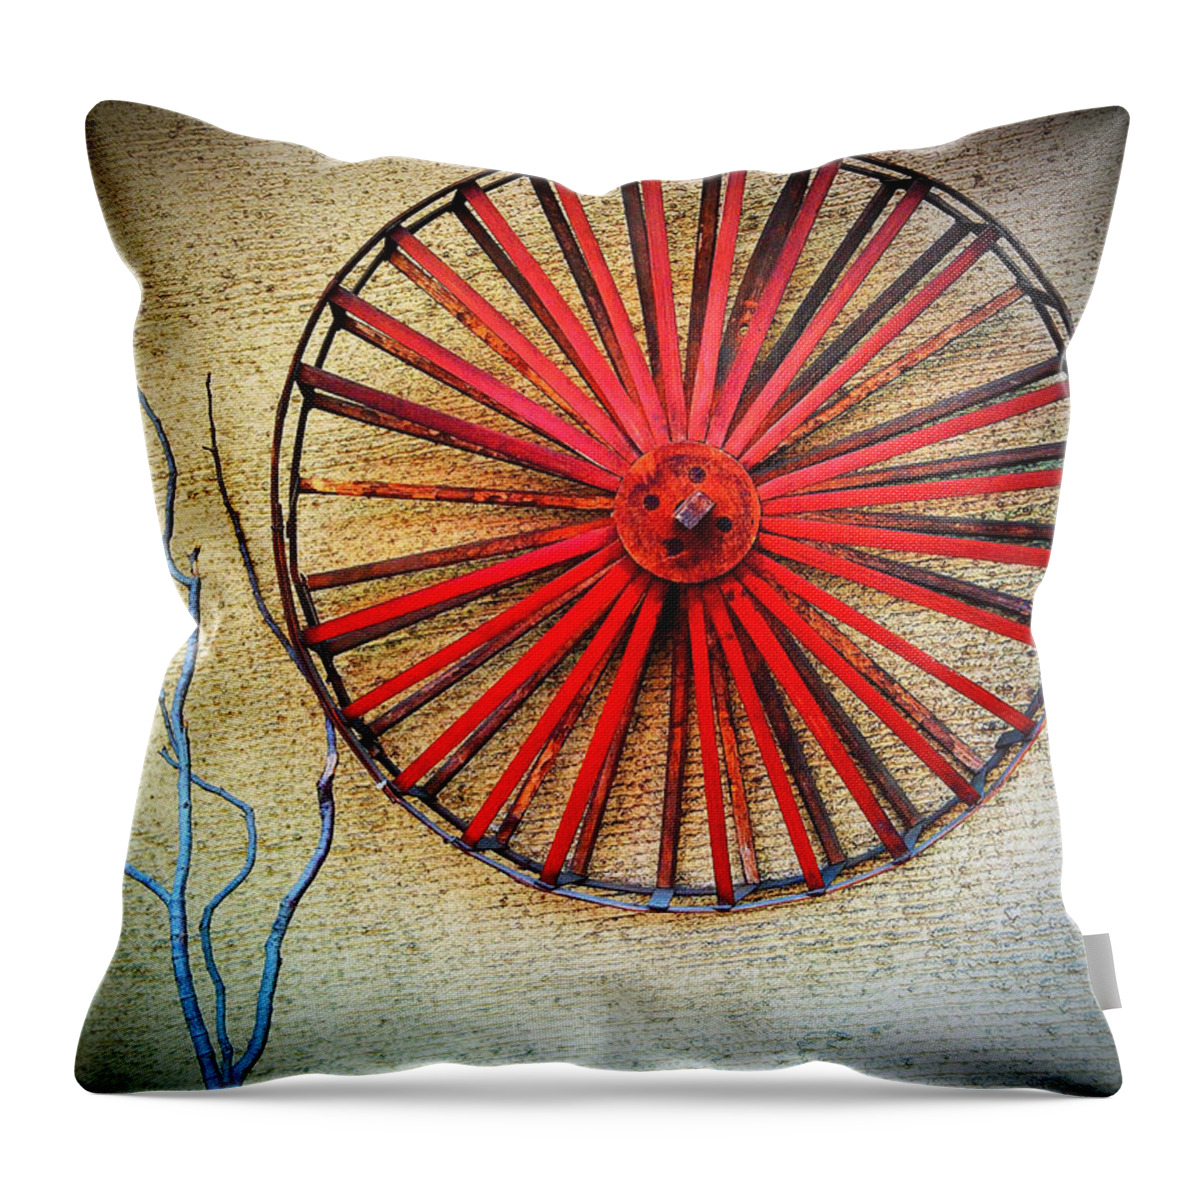 Wheel Throw Pillow featuring the photograph Wall Art #2 by Eena Bo